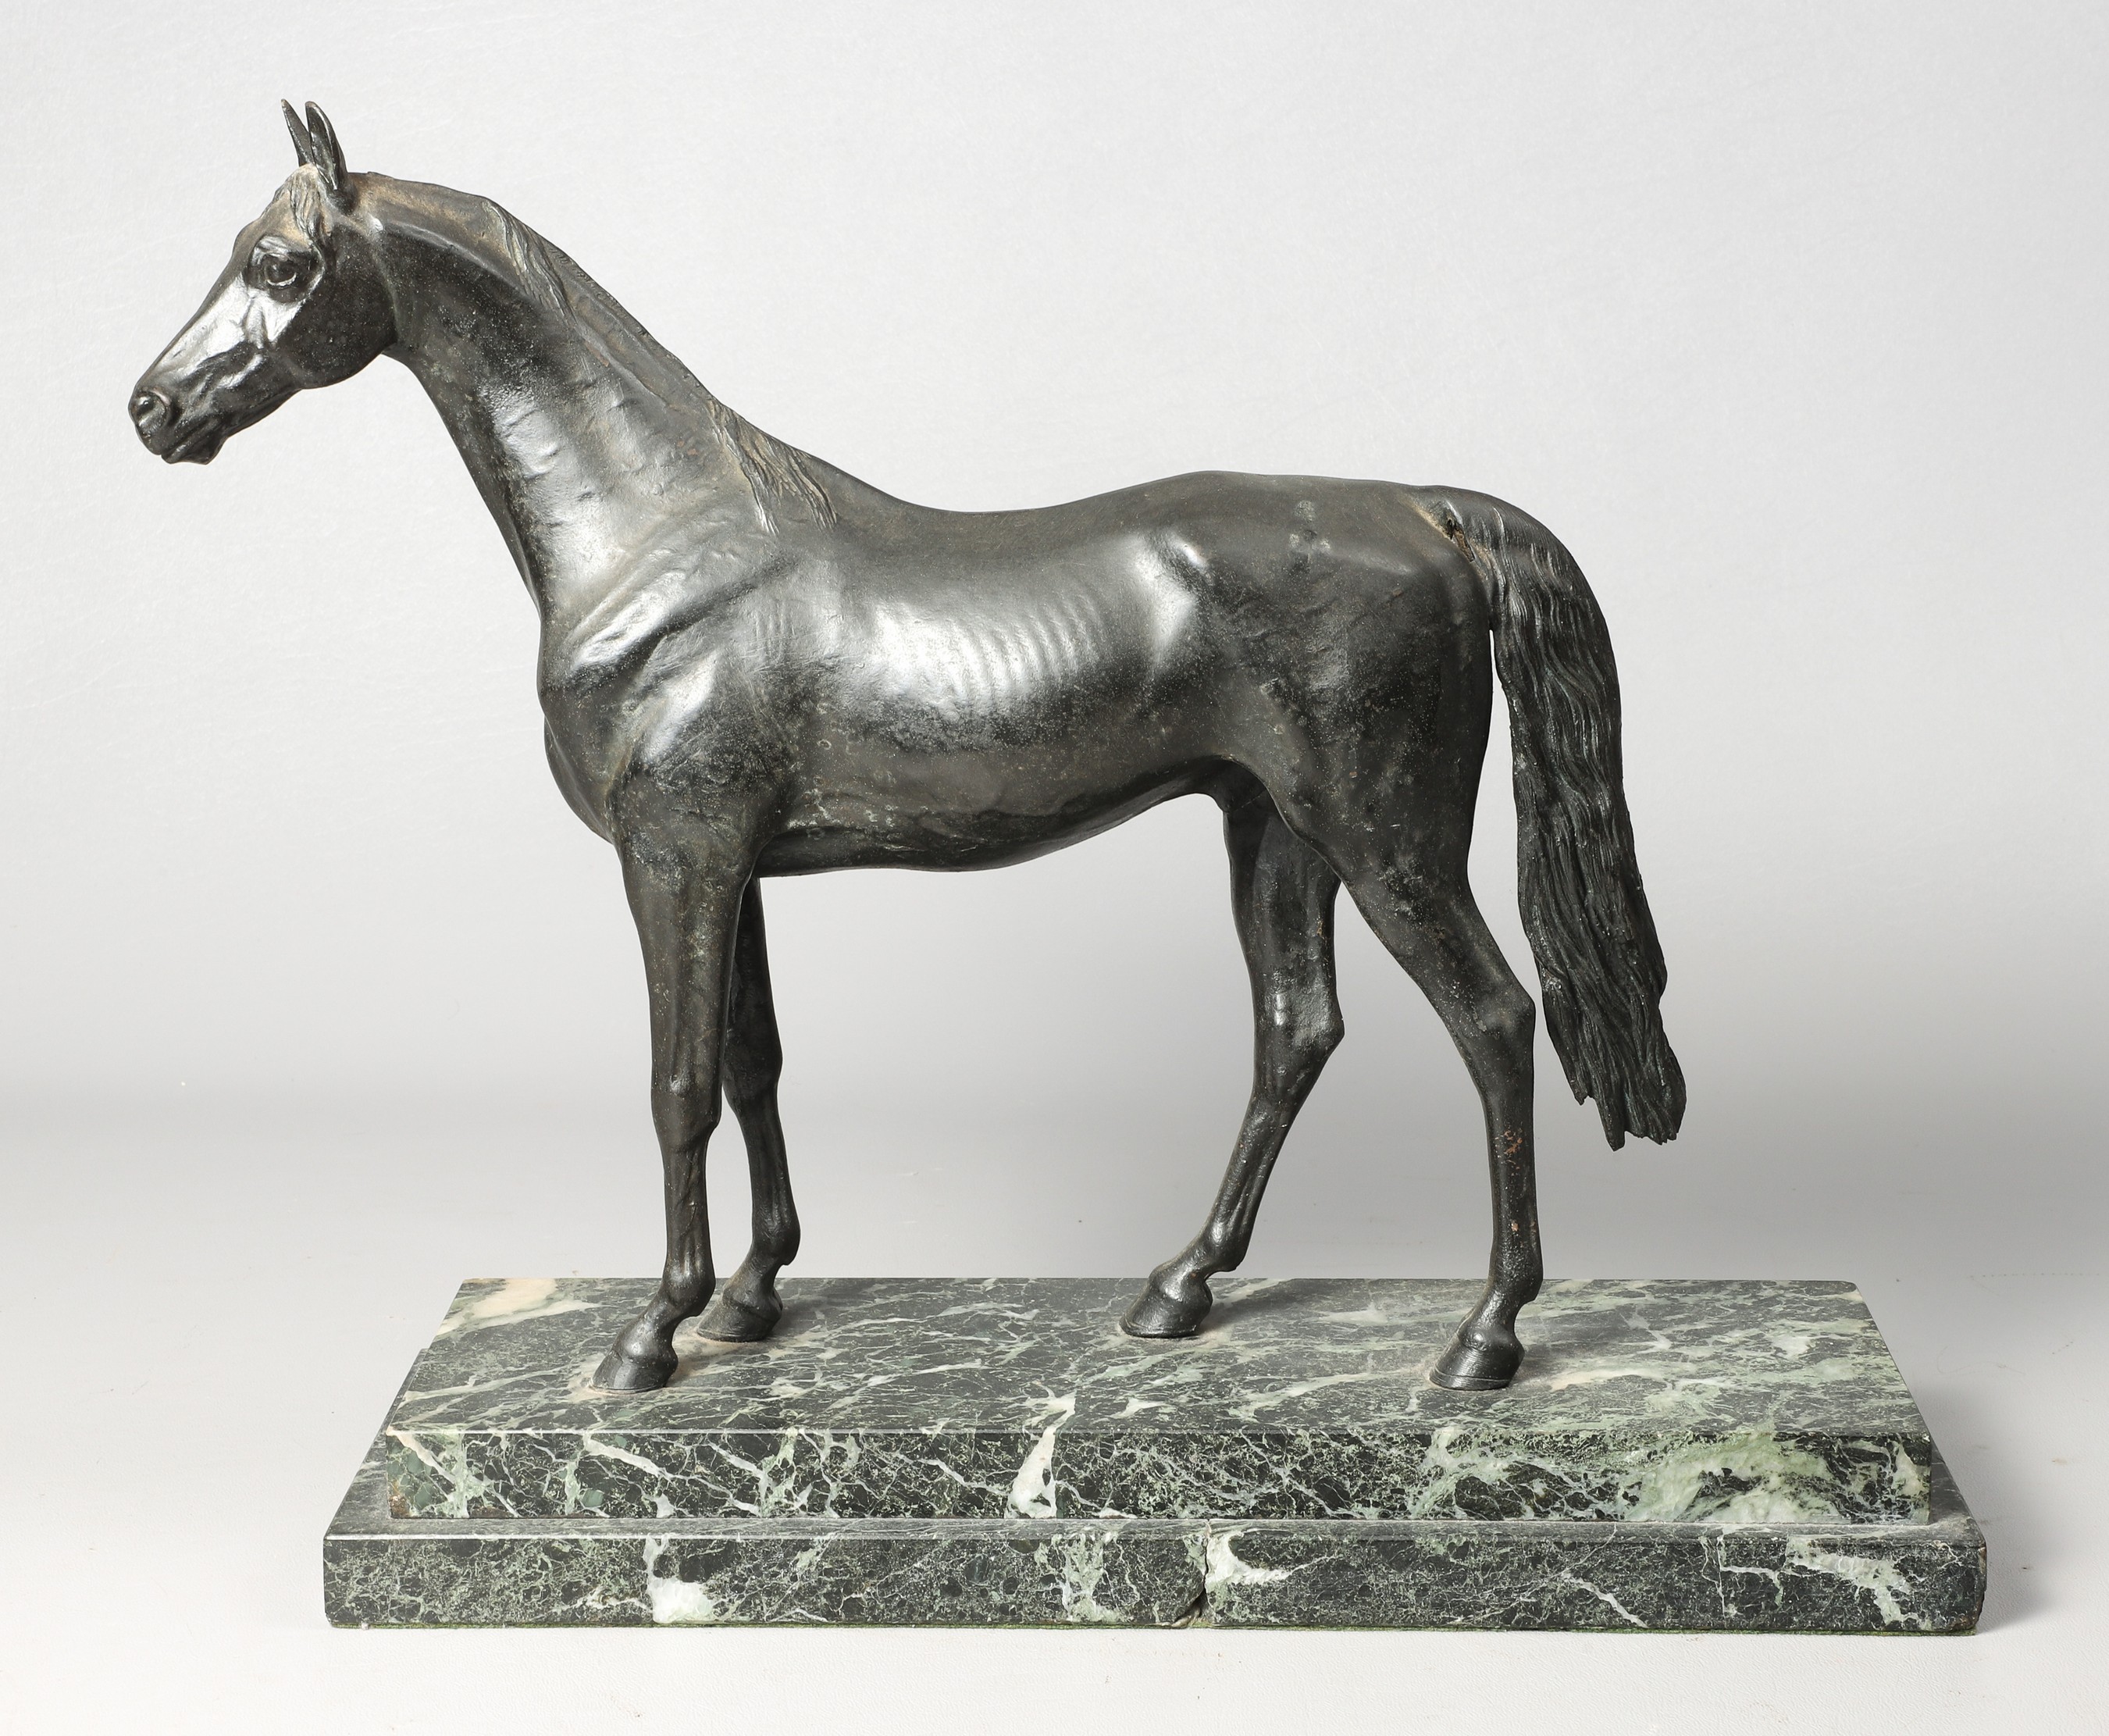 A Bronze sculpture of a horse on tiered